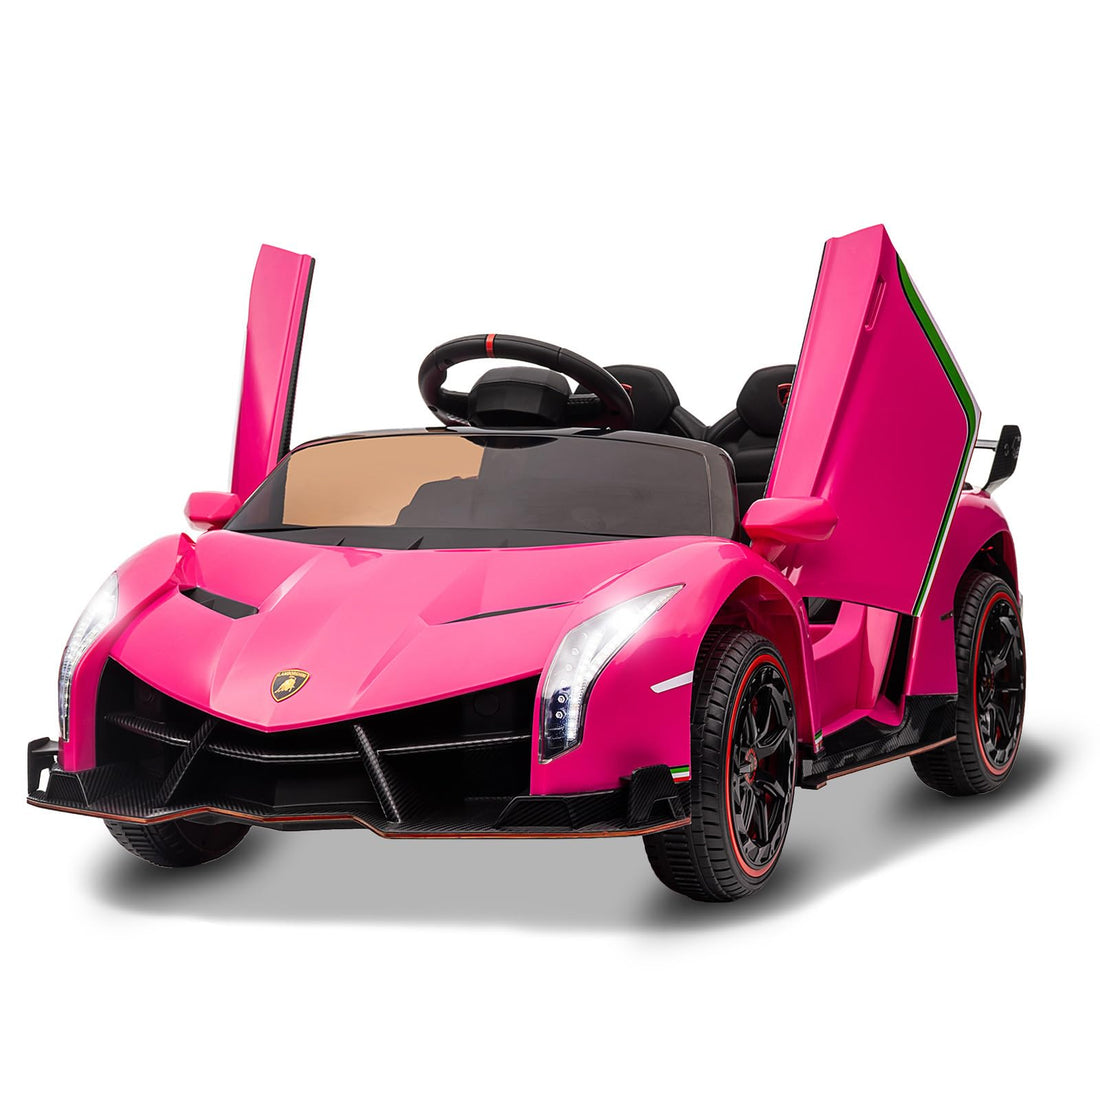 12V Kids Ride On Car, Licensed Lamborghini Venono Electric Car w/Parent Remote Control, Scissor Door, 3 Speeds, LED Headlights, Rocking & Music, Battery Powered Ride on Toy for Boys Girls, Pink